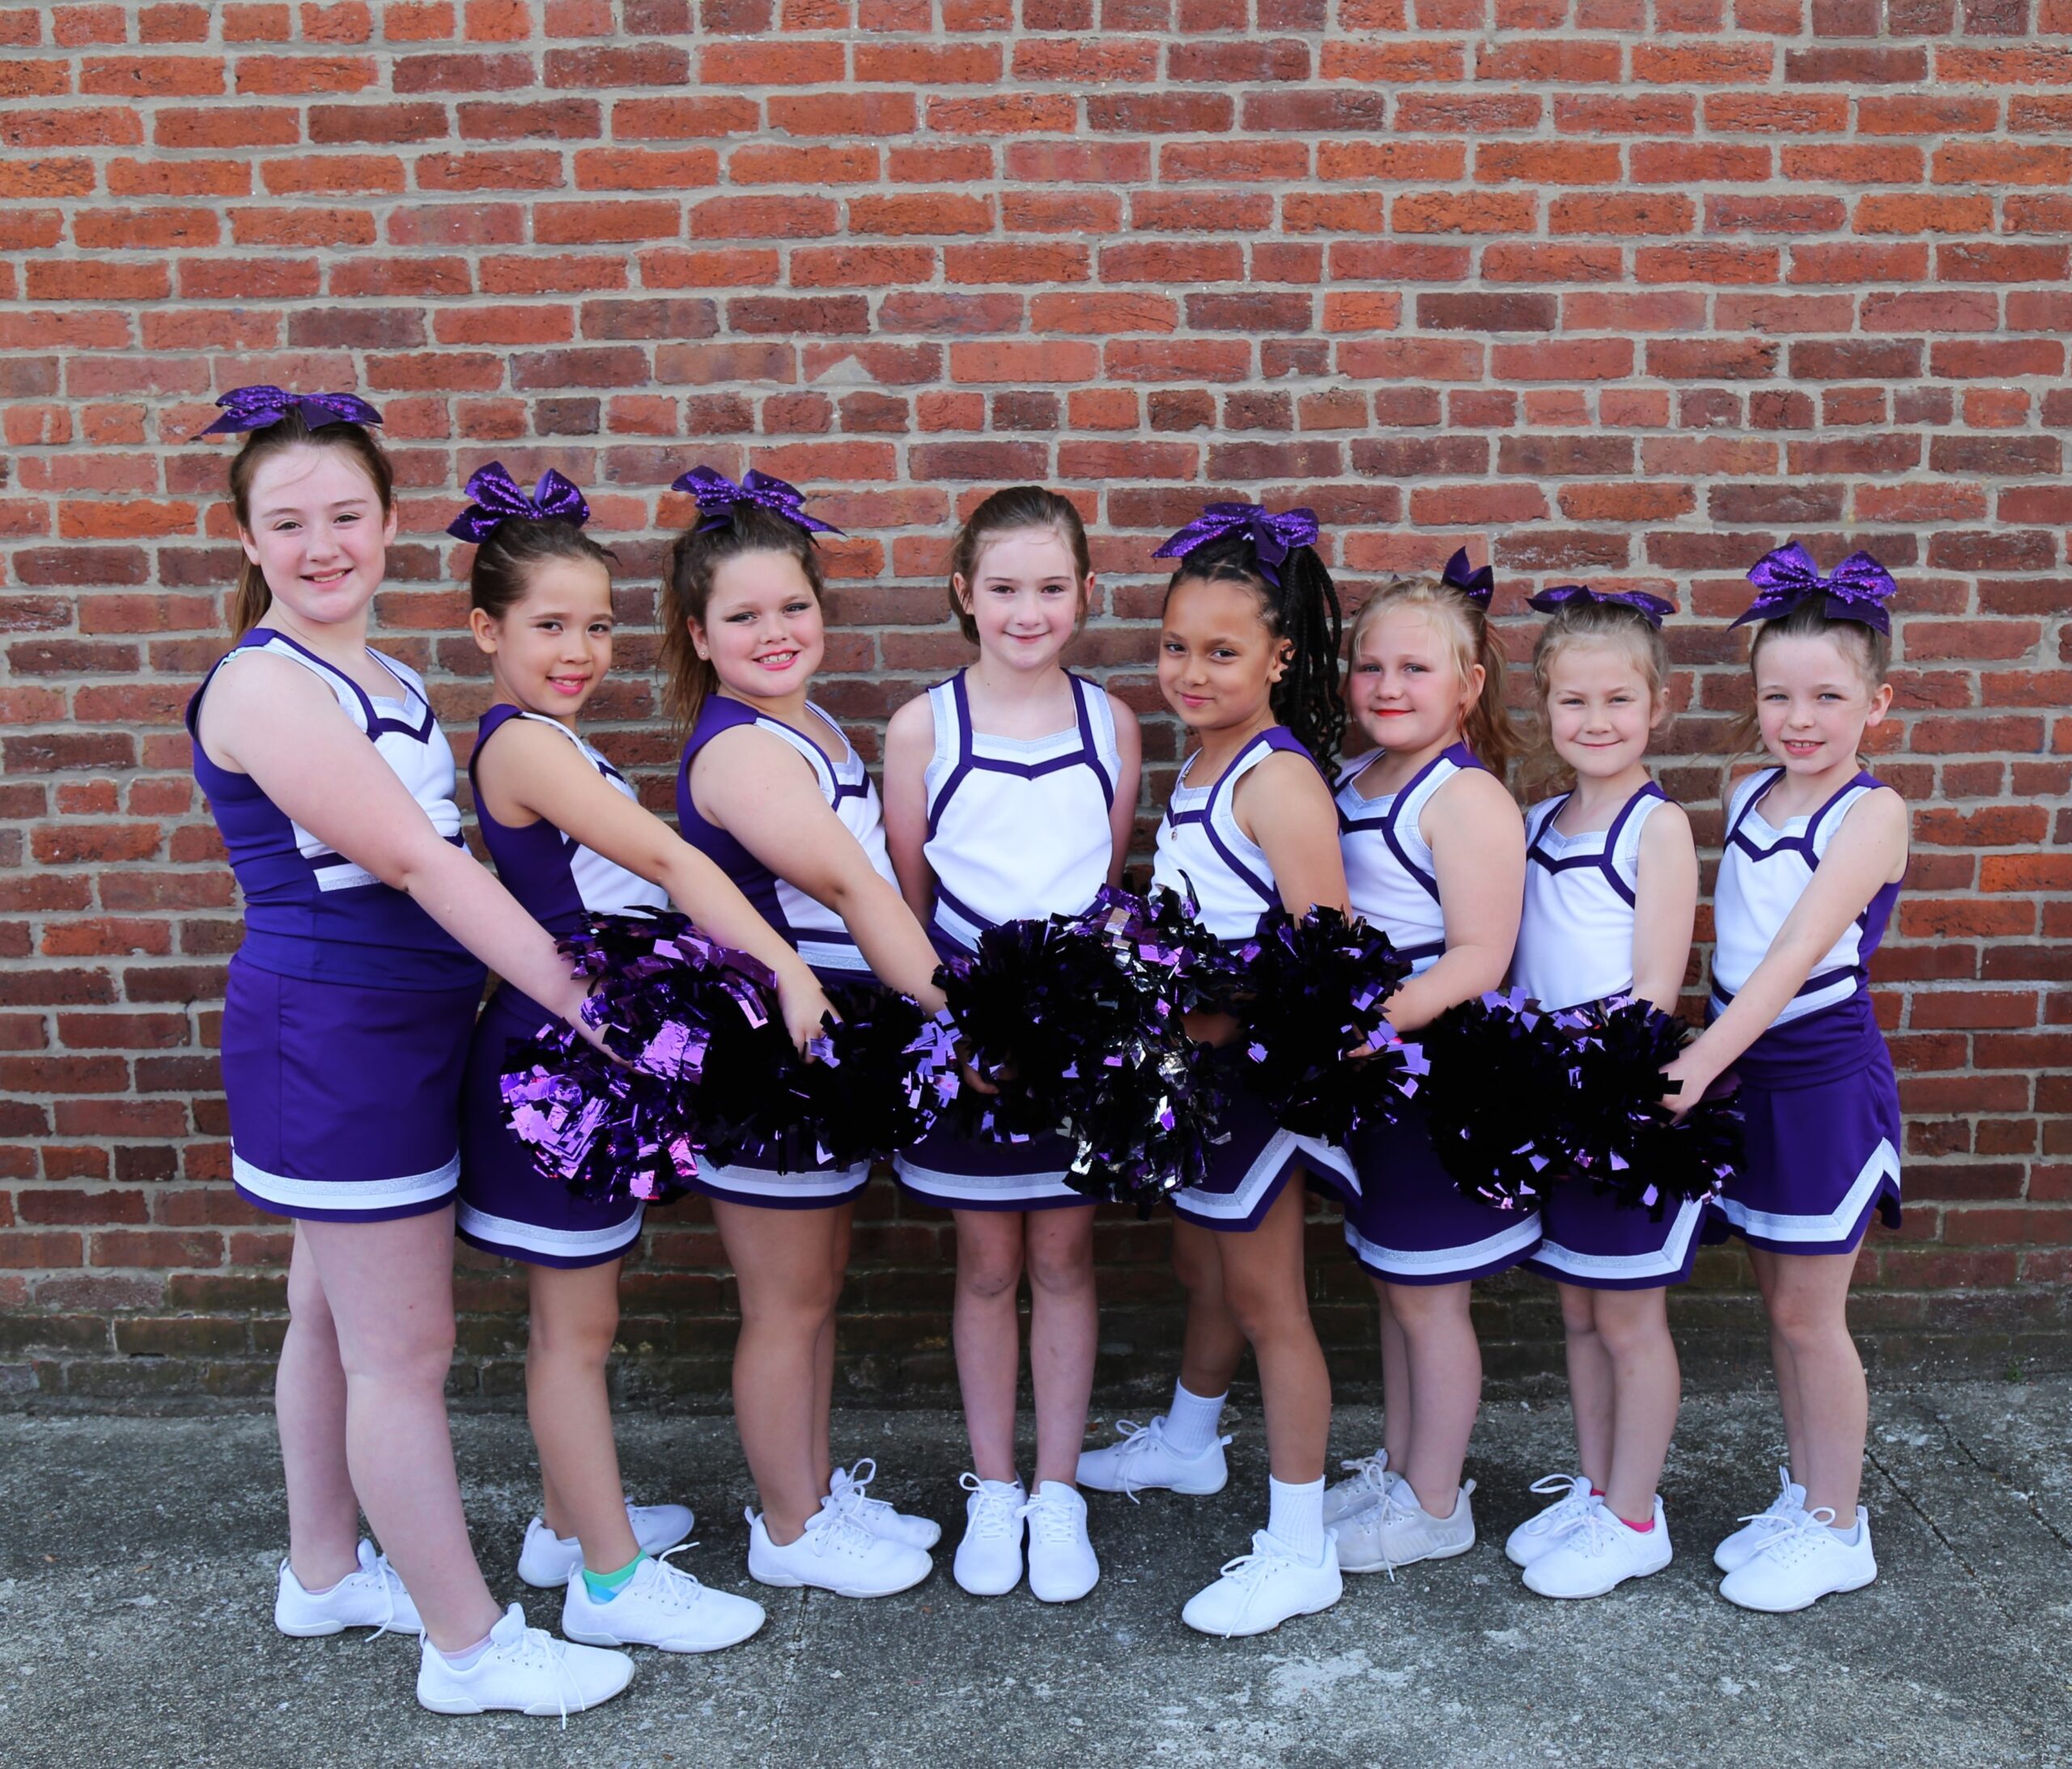 Dynamite Tumblers cheerleading group posing against a brick wall in purple and white uniforms